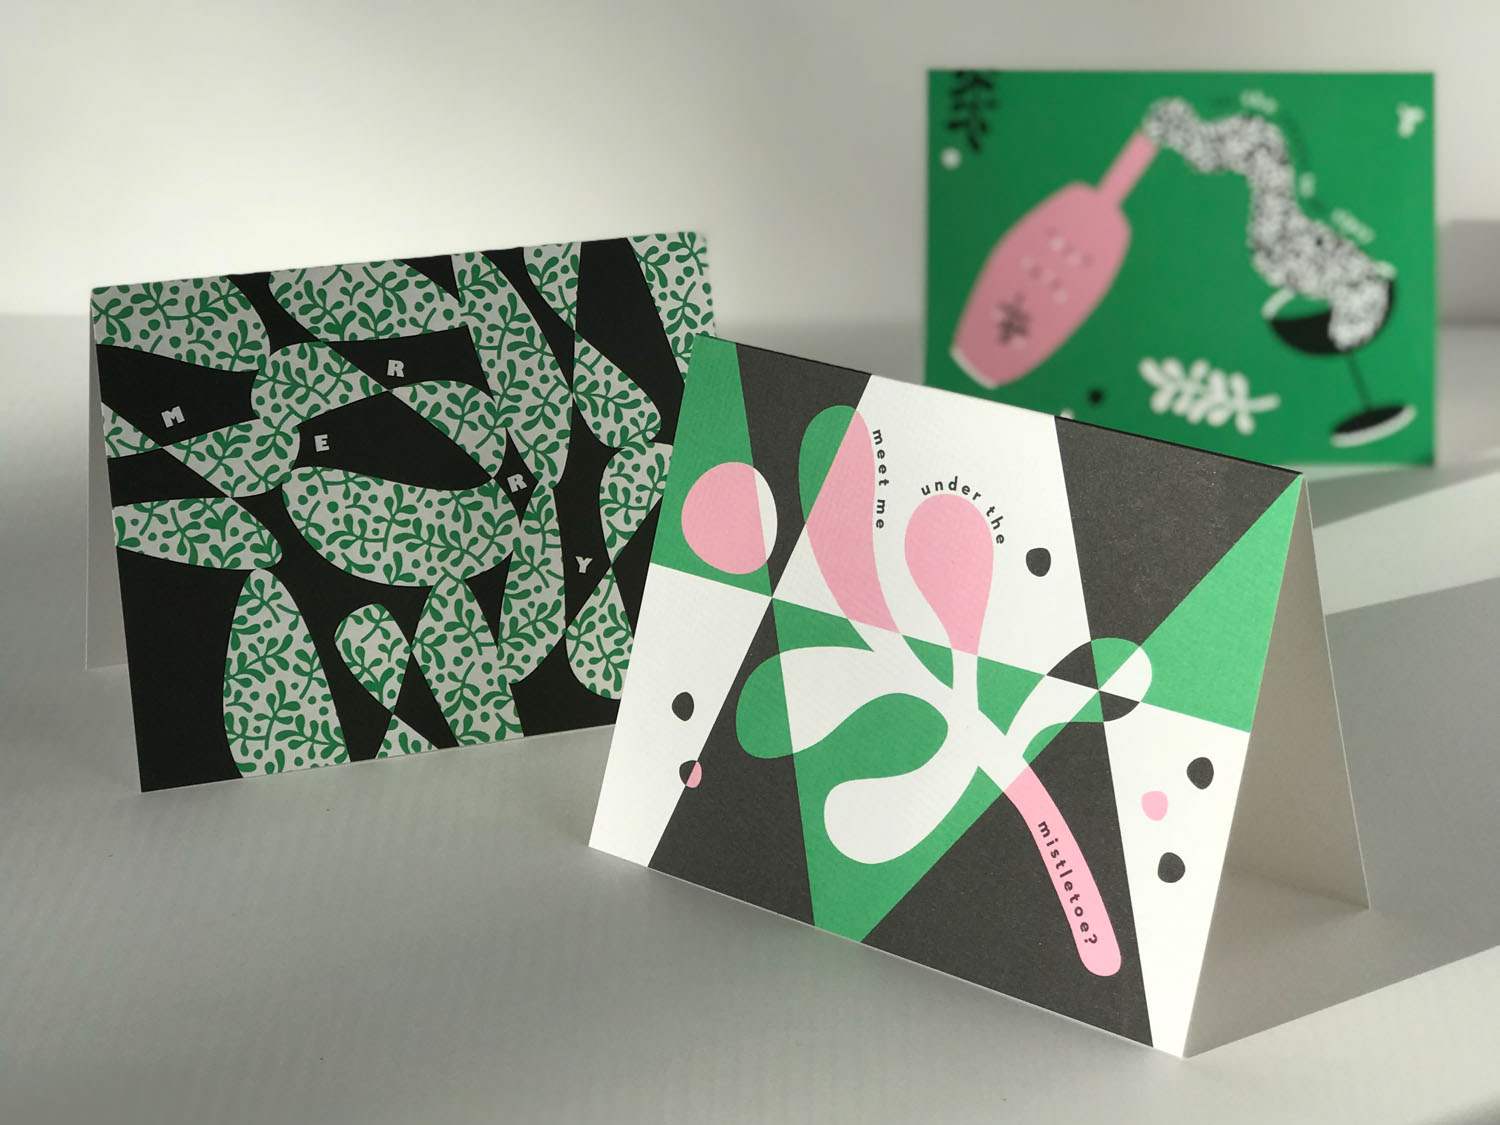 Pink and green retro, mid-century inspired Christmas and holiday cards by @mydarlin_bk